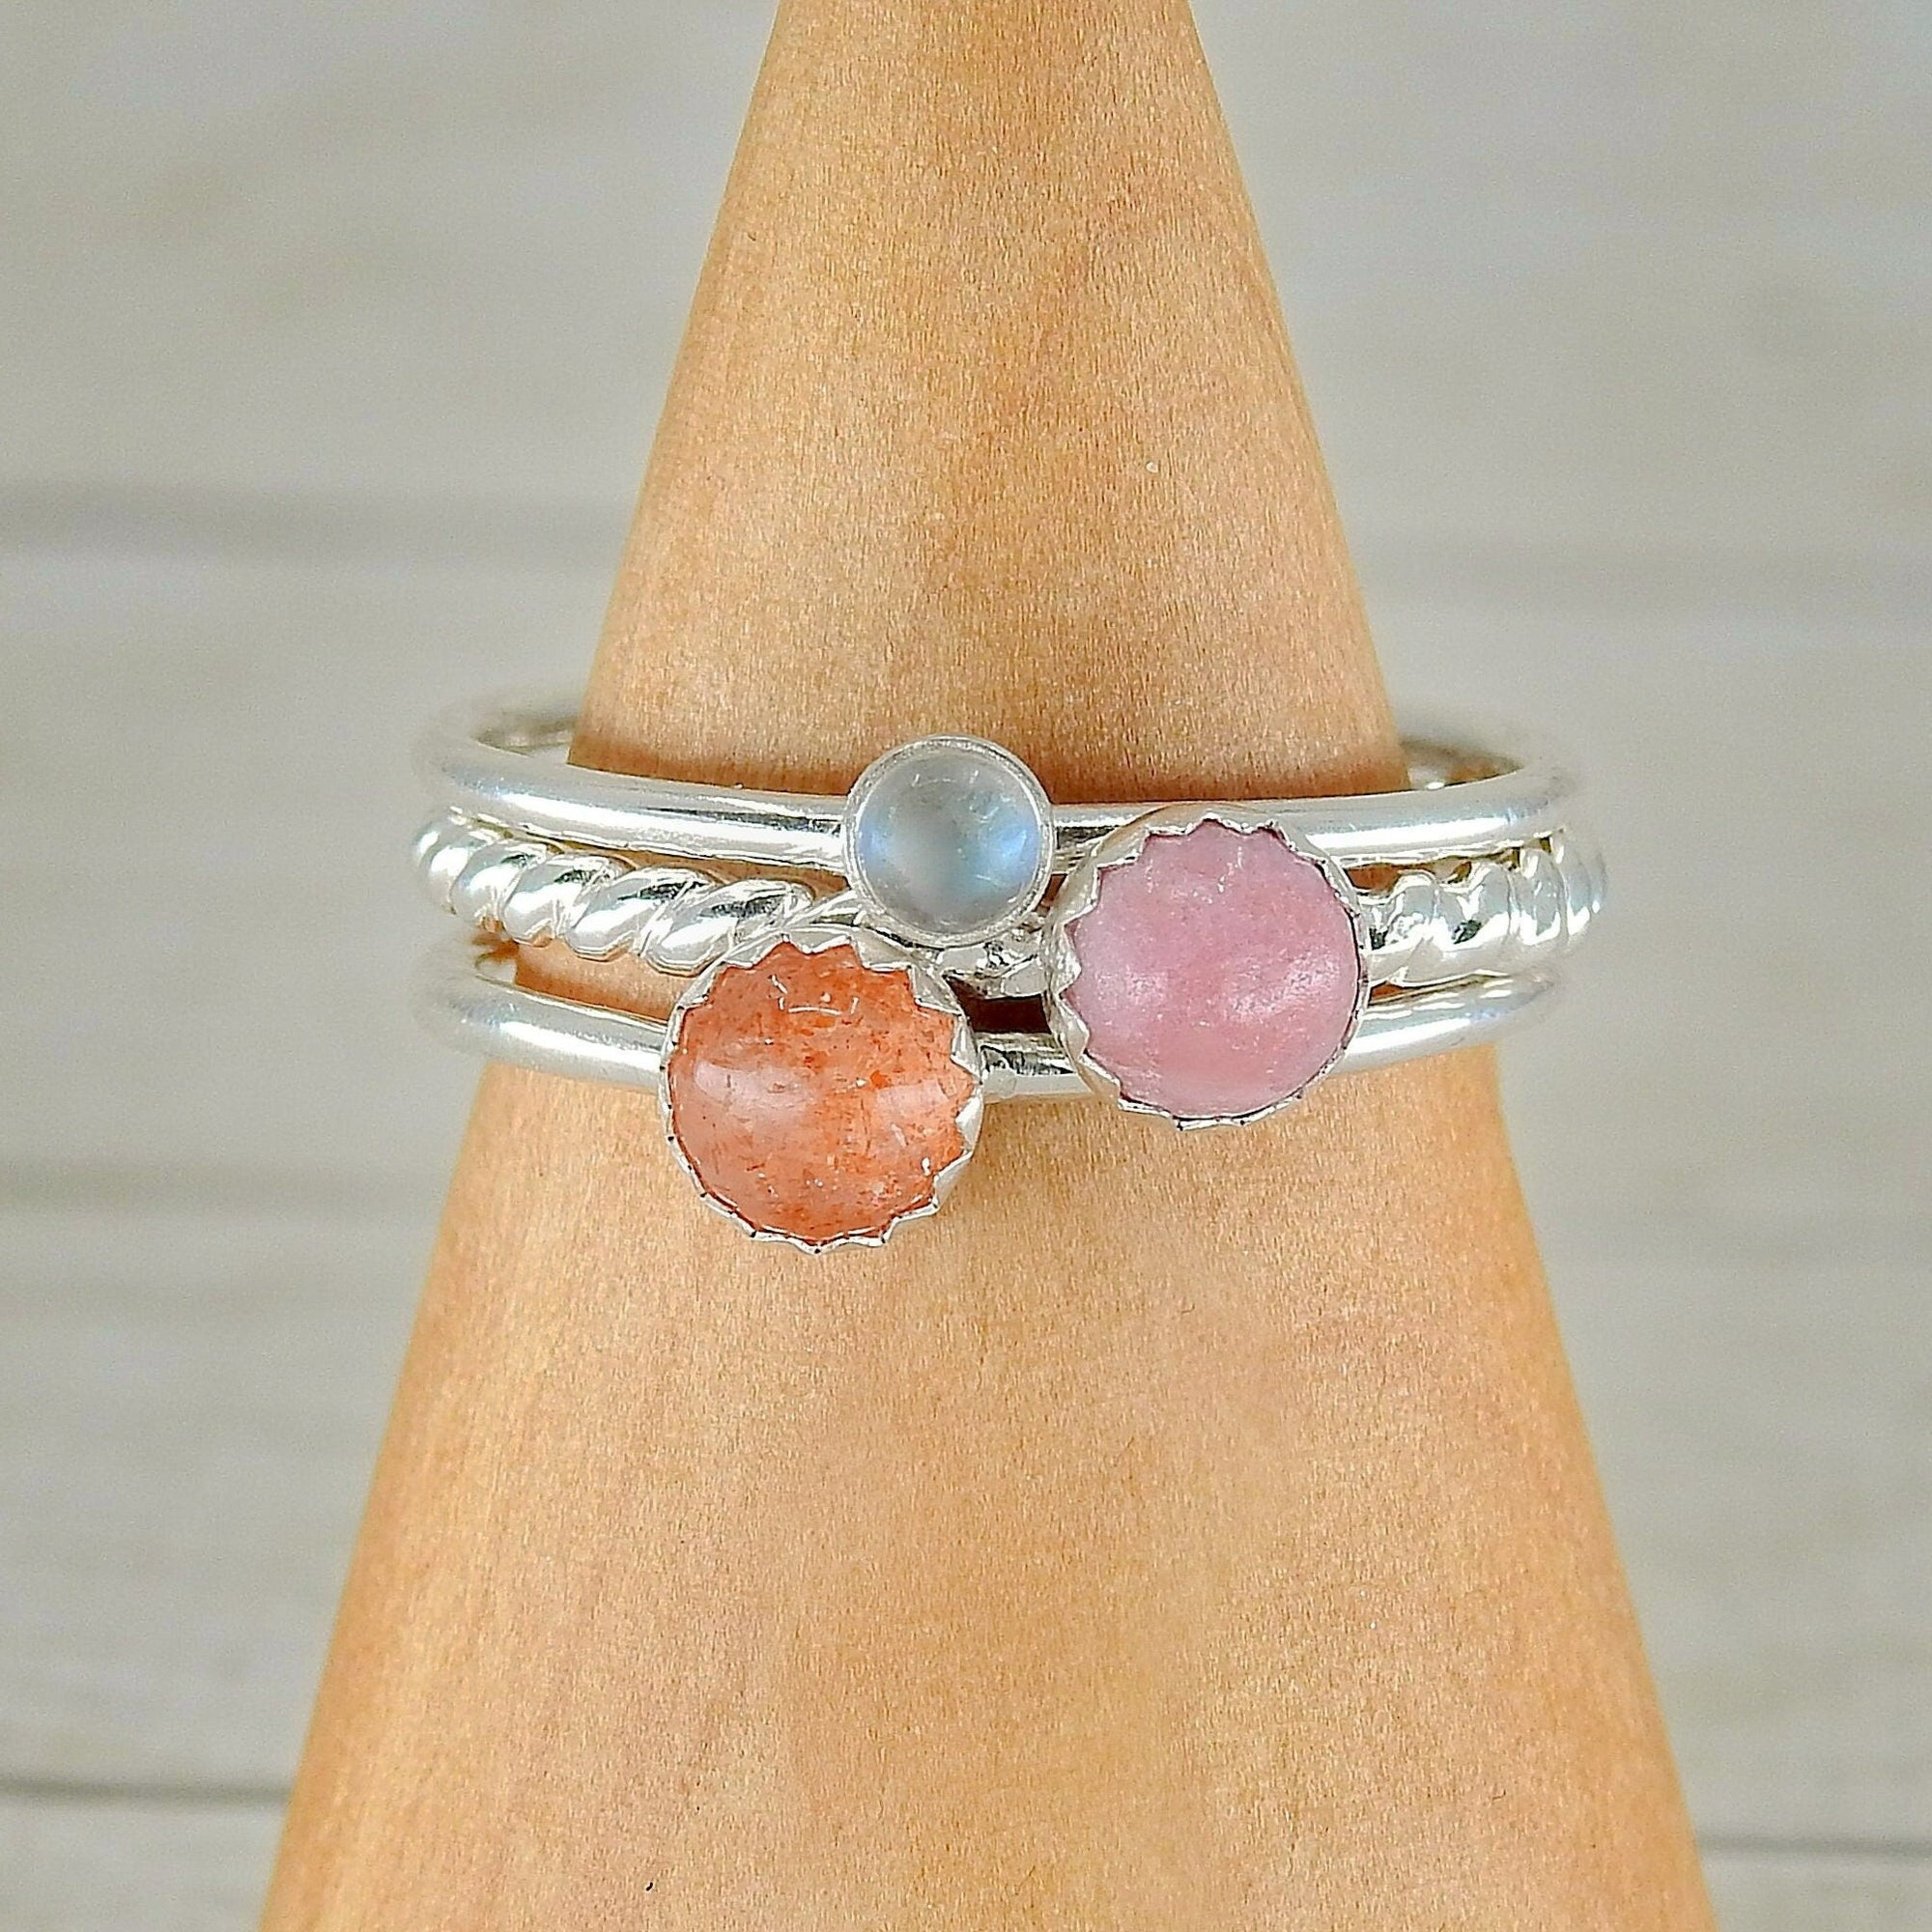 The Venus Ring Stack of Confidence & Self Love - Sterling Silver, Made to Order Stacking Ring, Moonstone Ring, Rhodonite Ring, Sunstone Ring